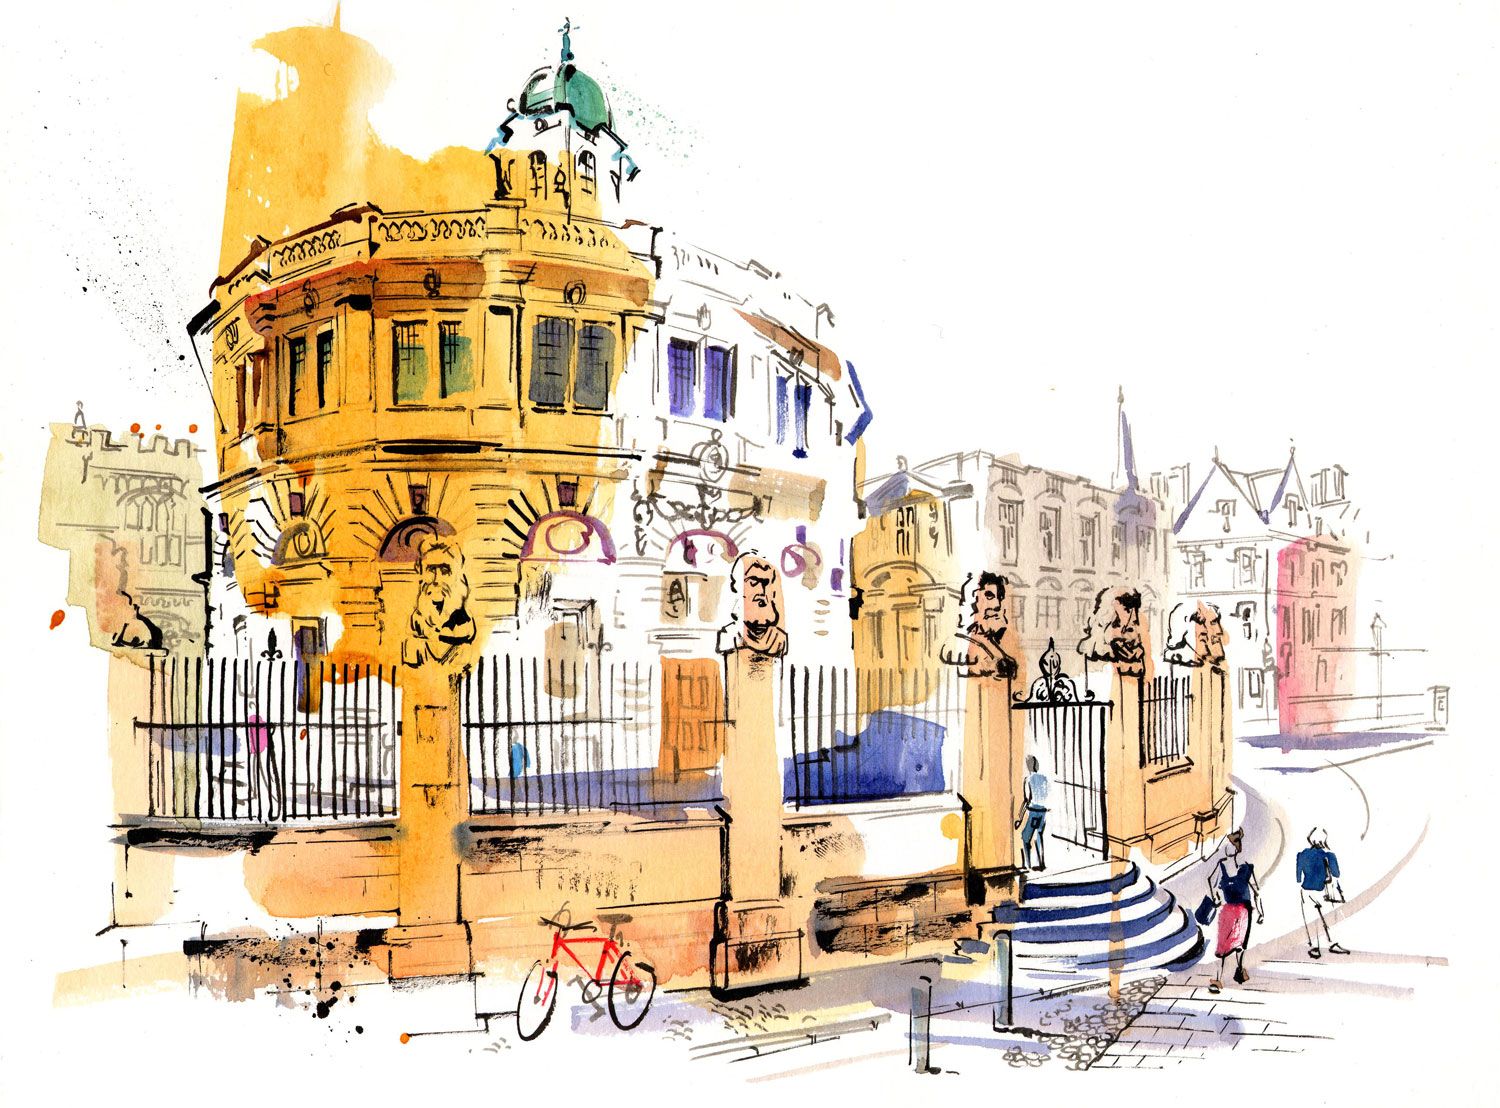 The Sheldonian Theatre by Gary Wing